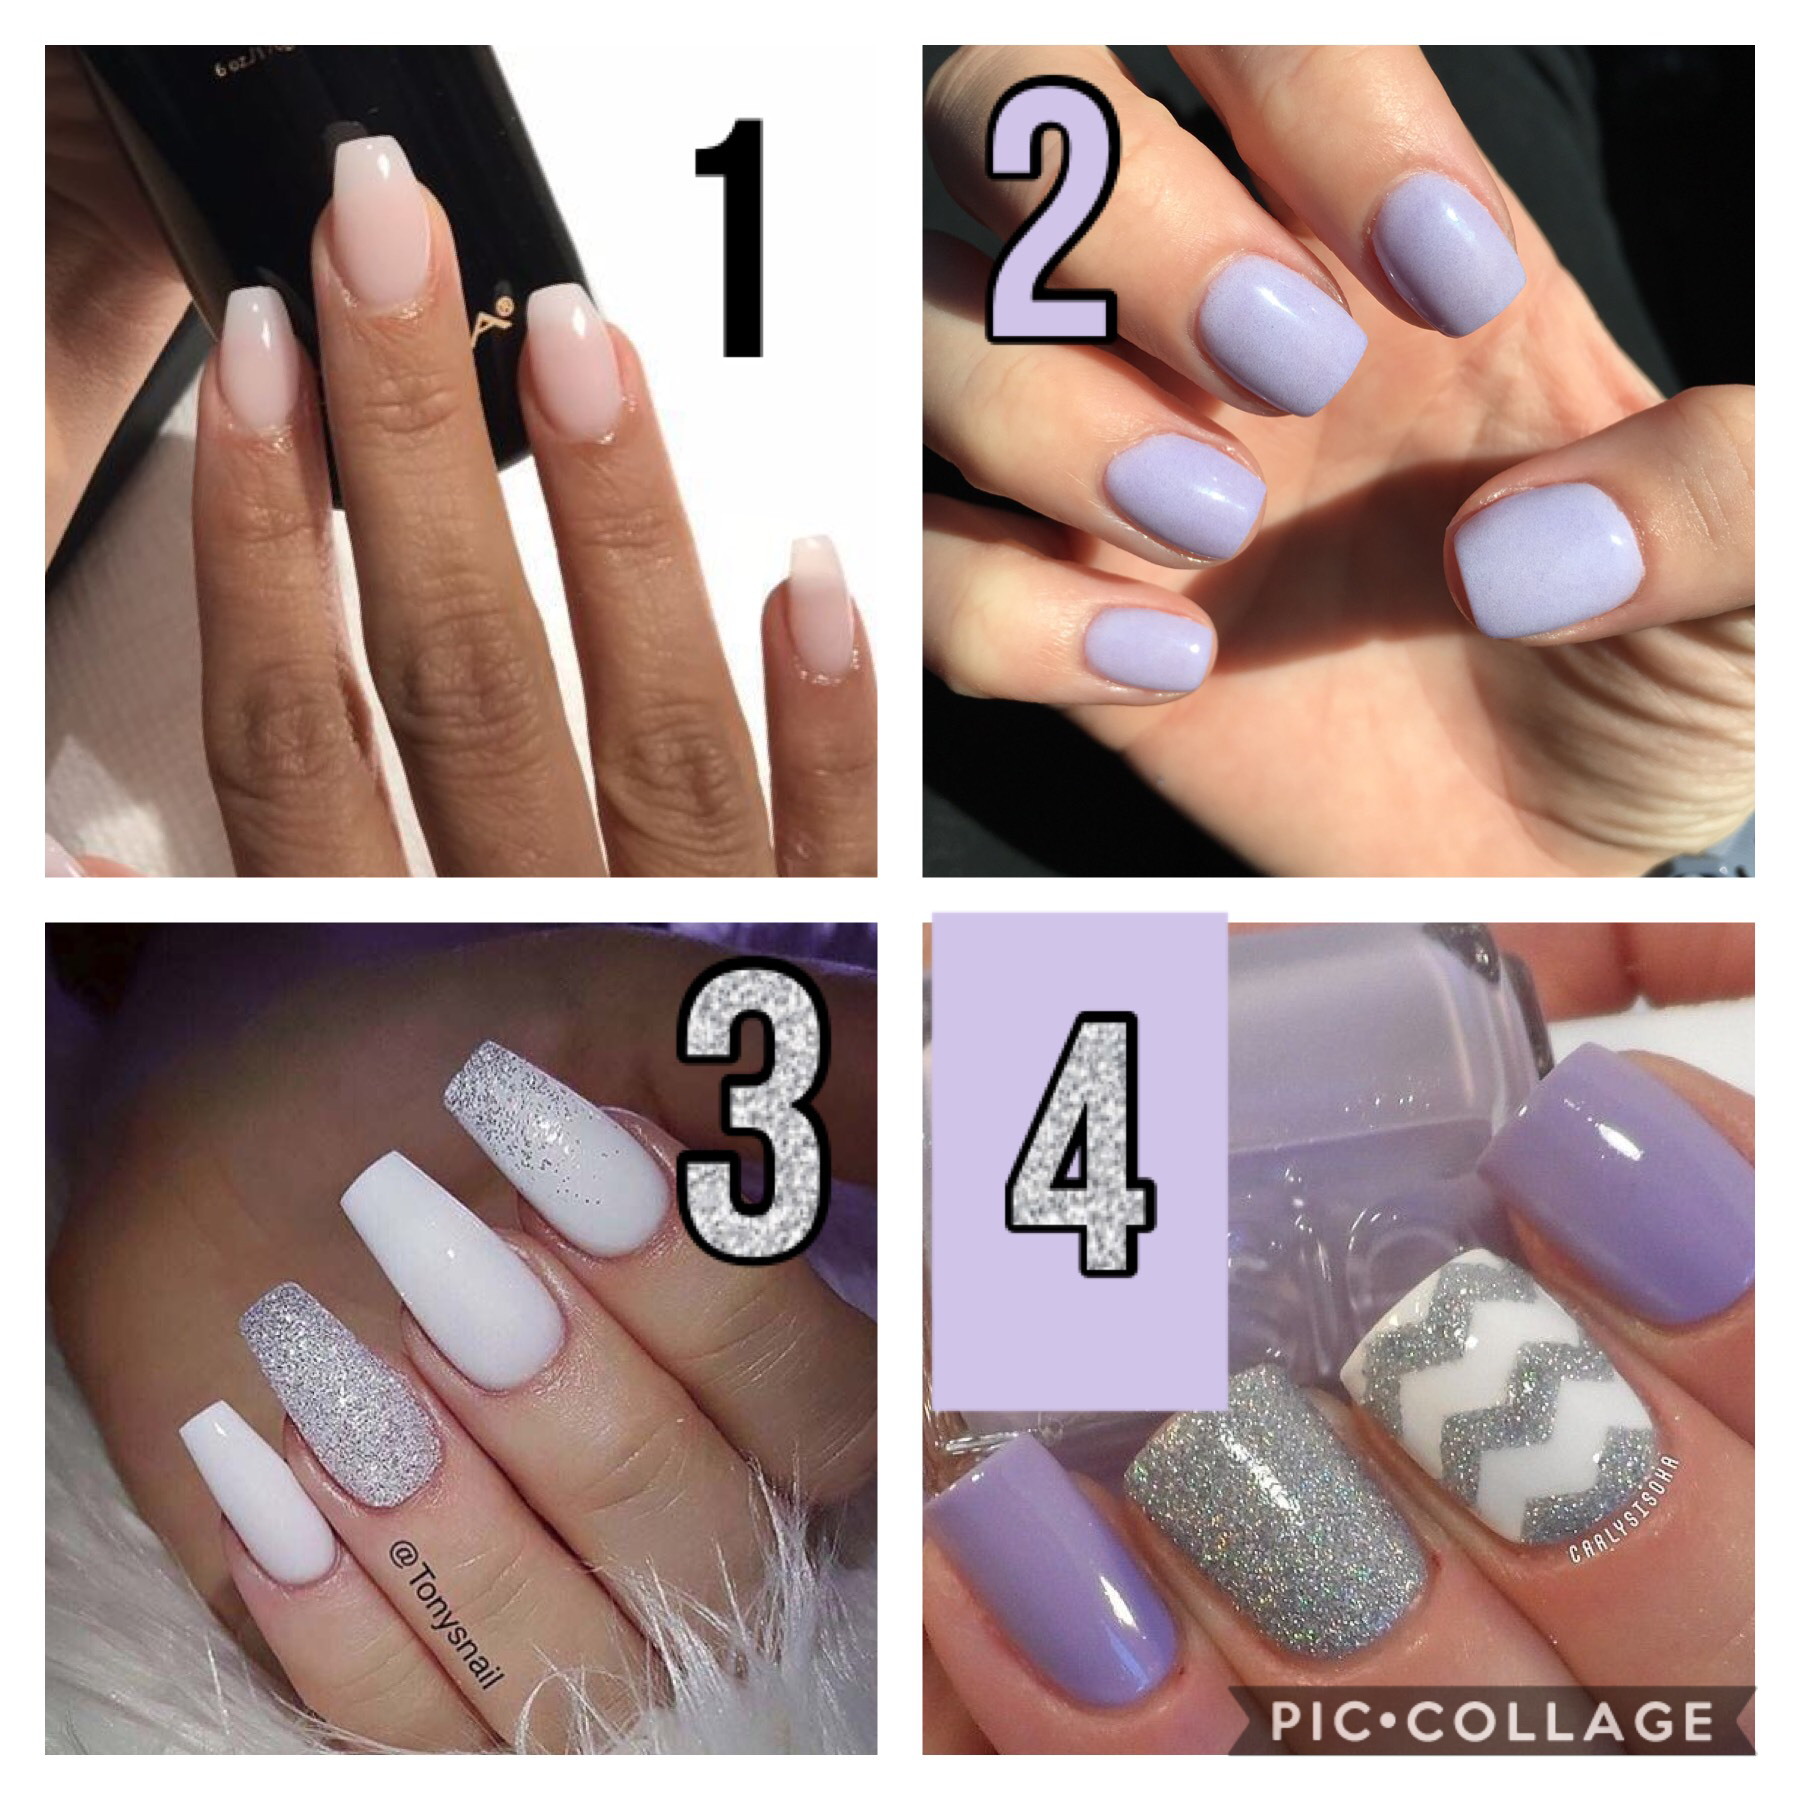 If you pick 1 or 3 my nails won’t actually be that long💅🏻